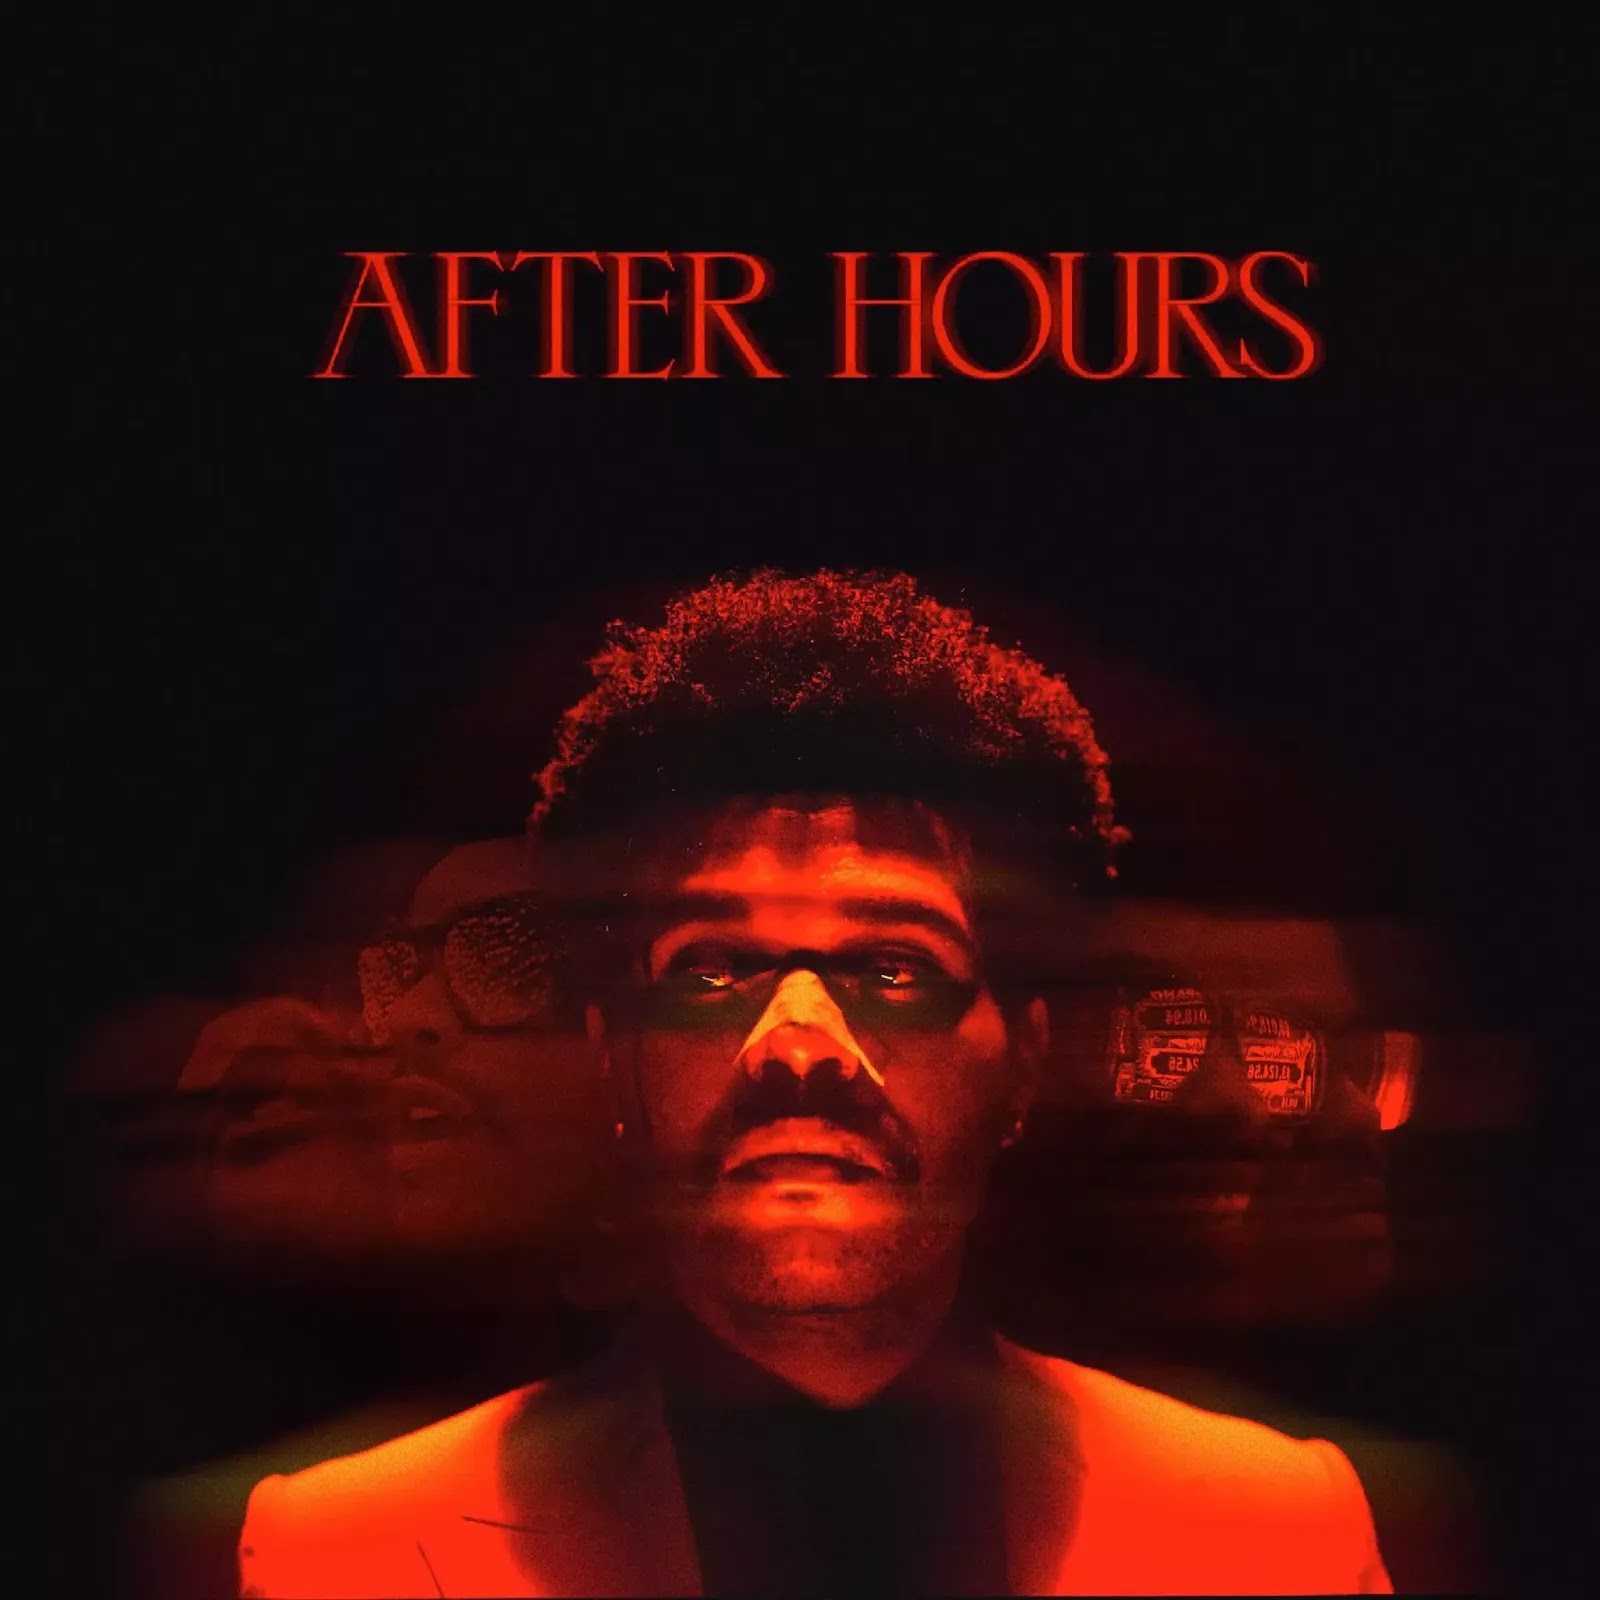 The-Weeknd-After-Hours-Album-Lyrics-And-Tracklist.jpg